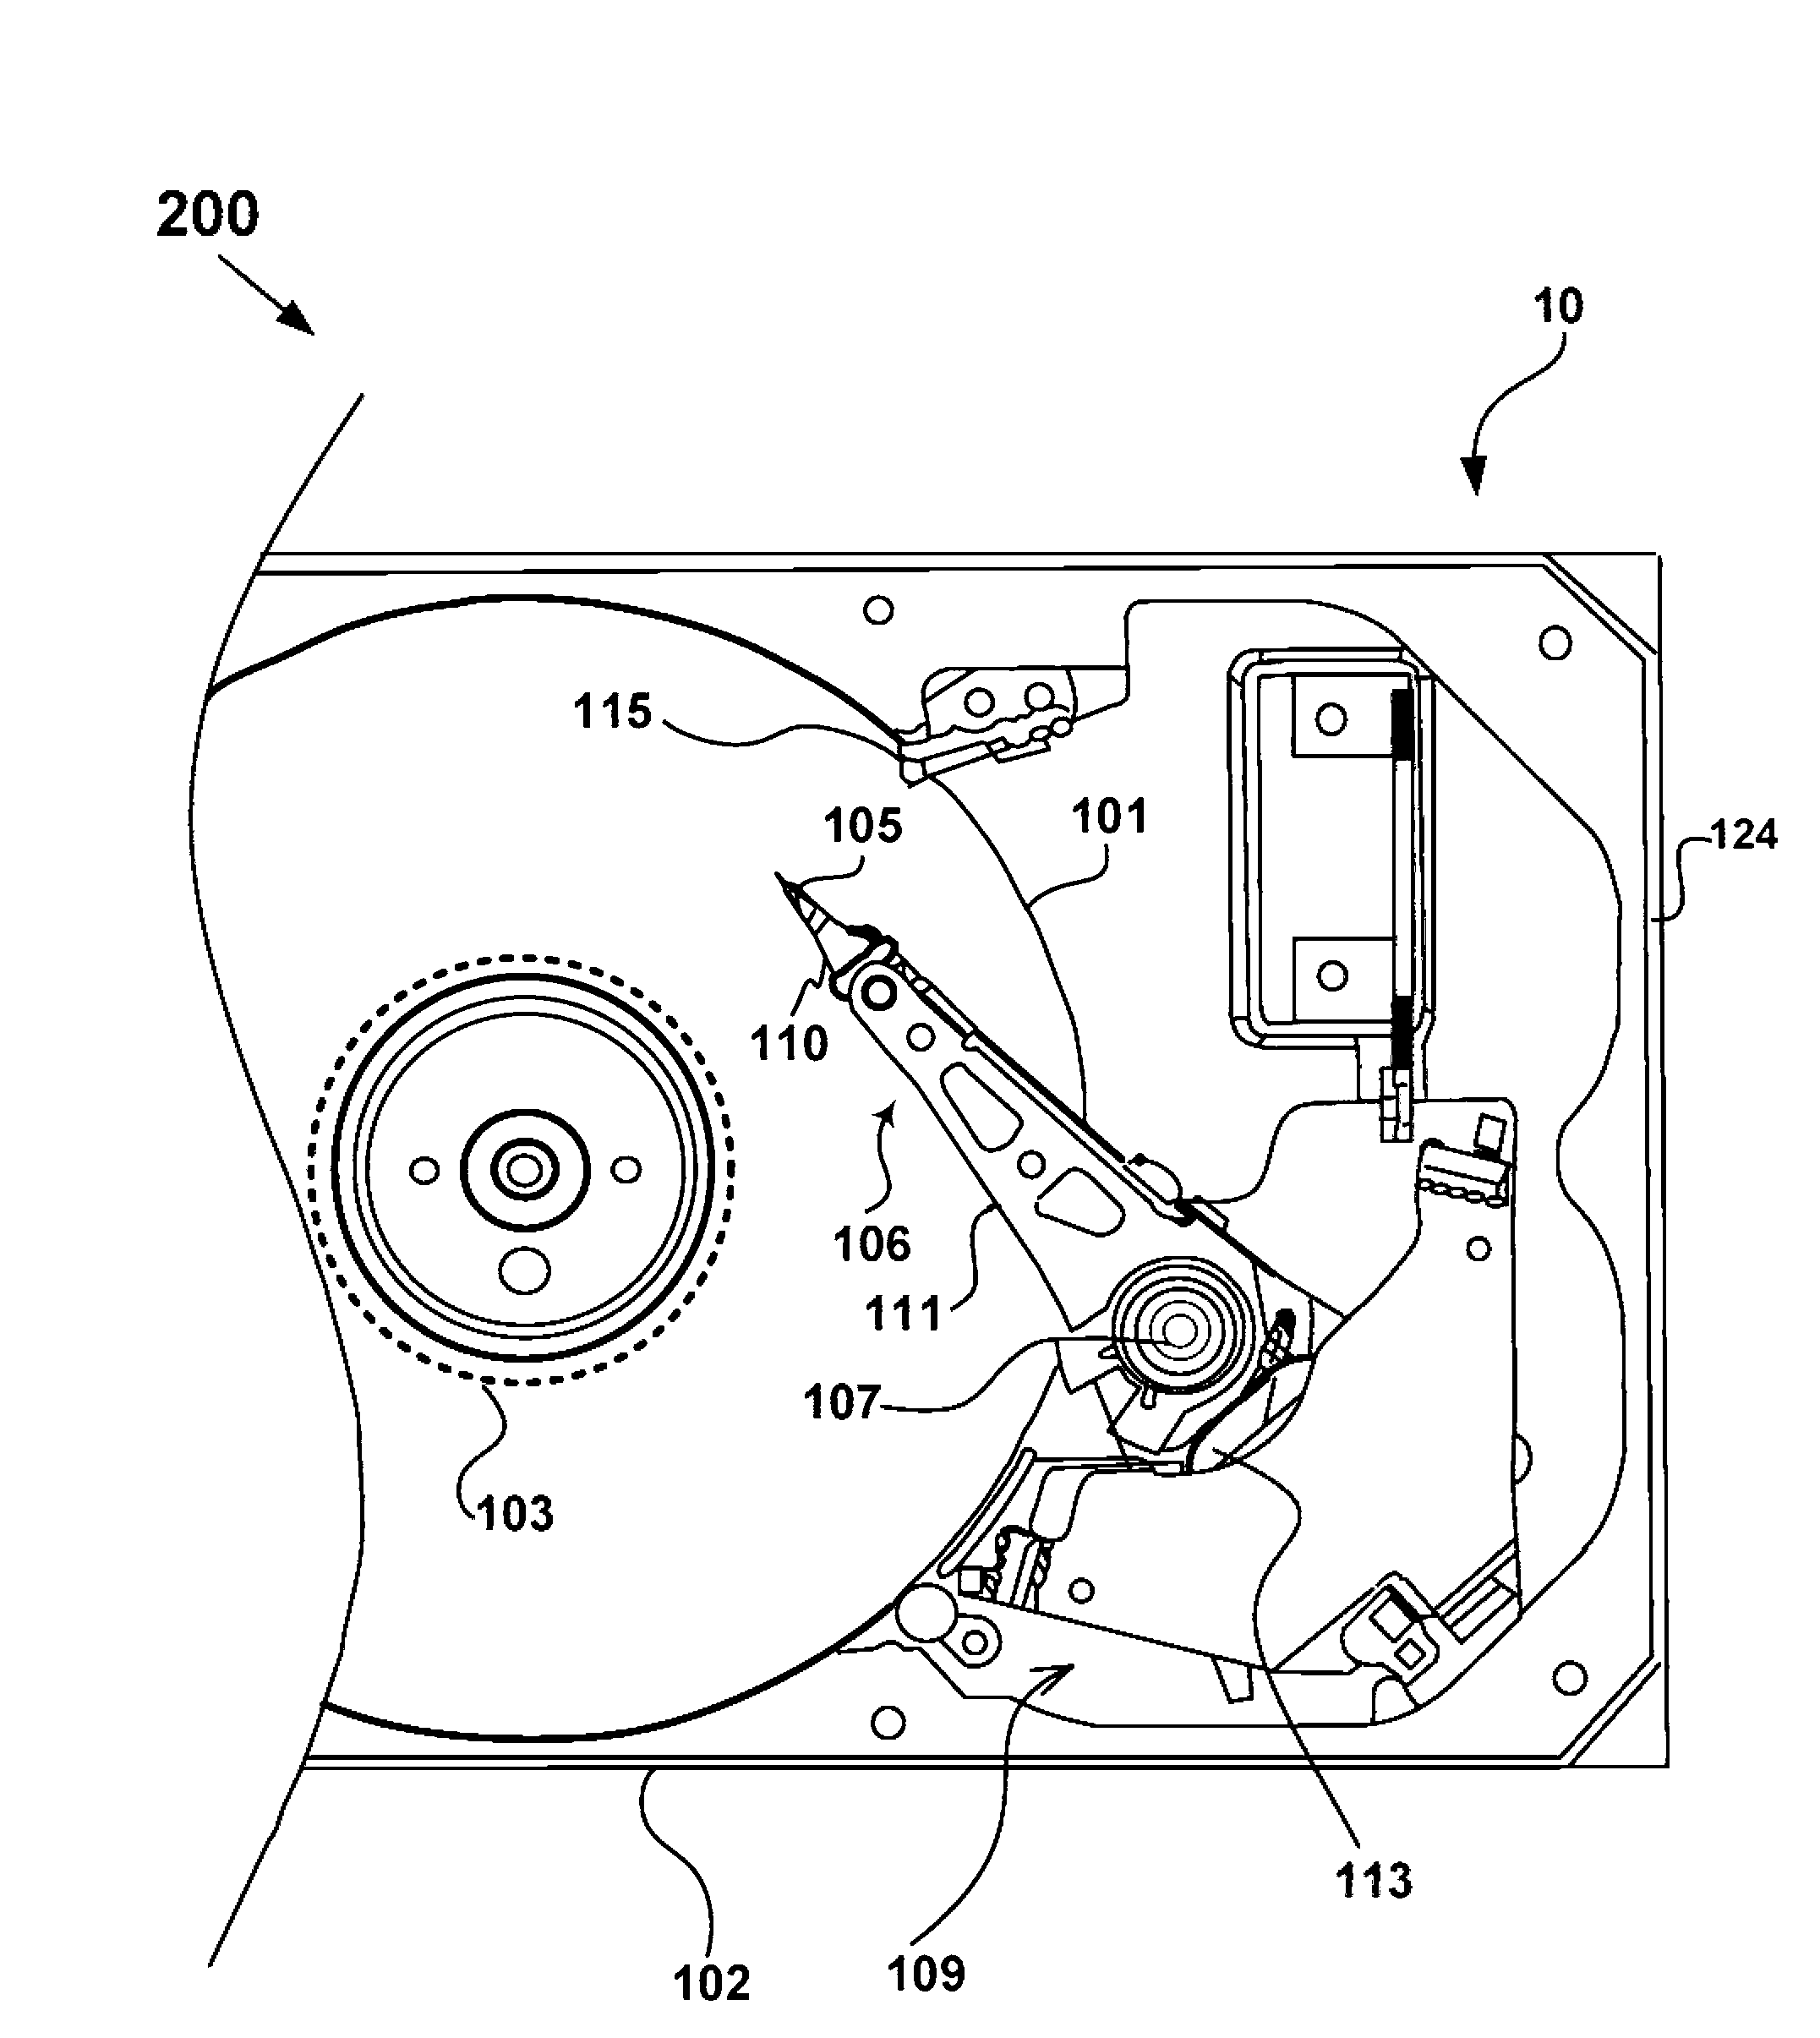 Hermetically resealable hard-disk drive configured for recharging with a low-density gas